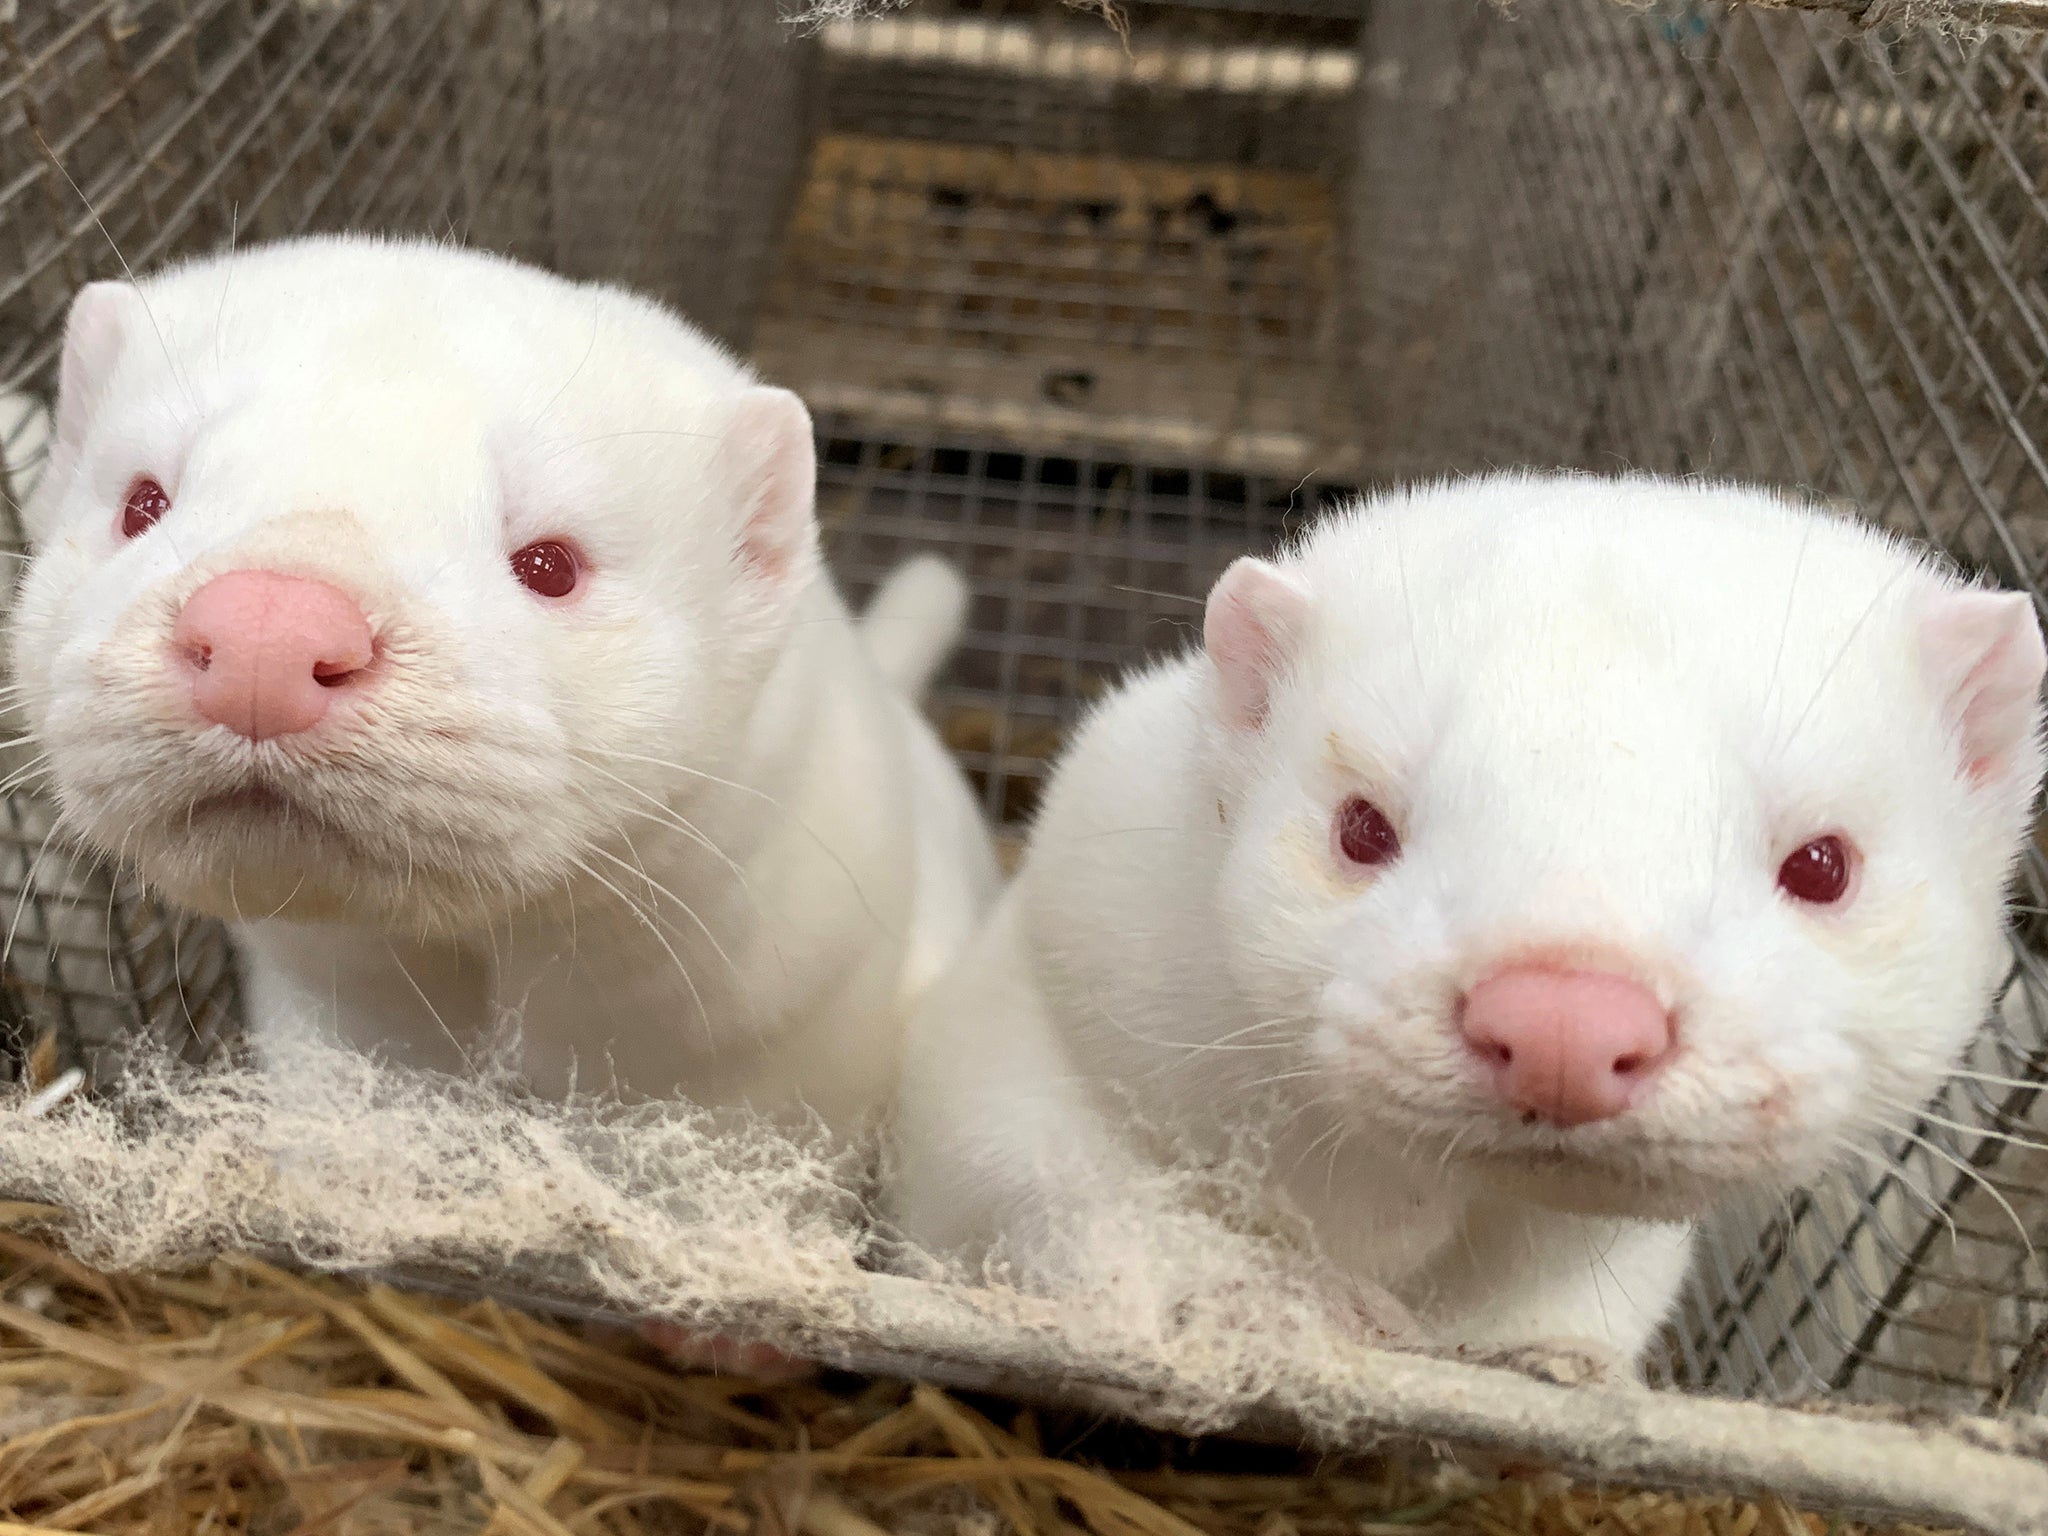 Millions of mink are farmed for their fur in Denmark every year&nbsp;